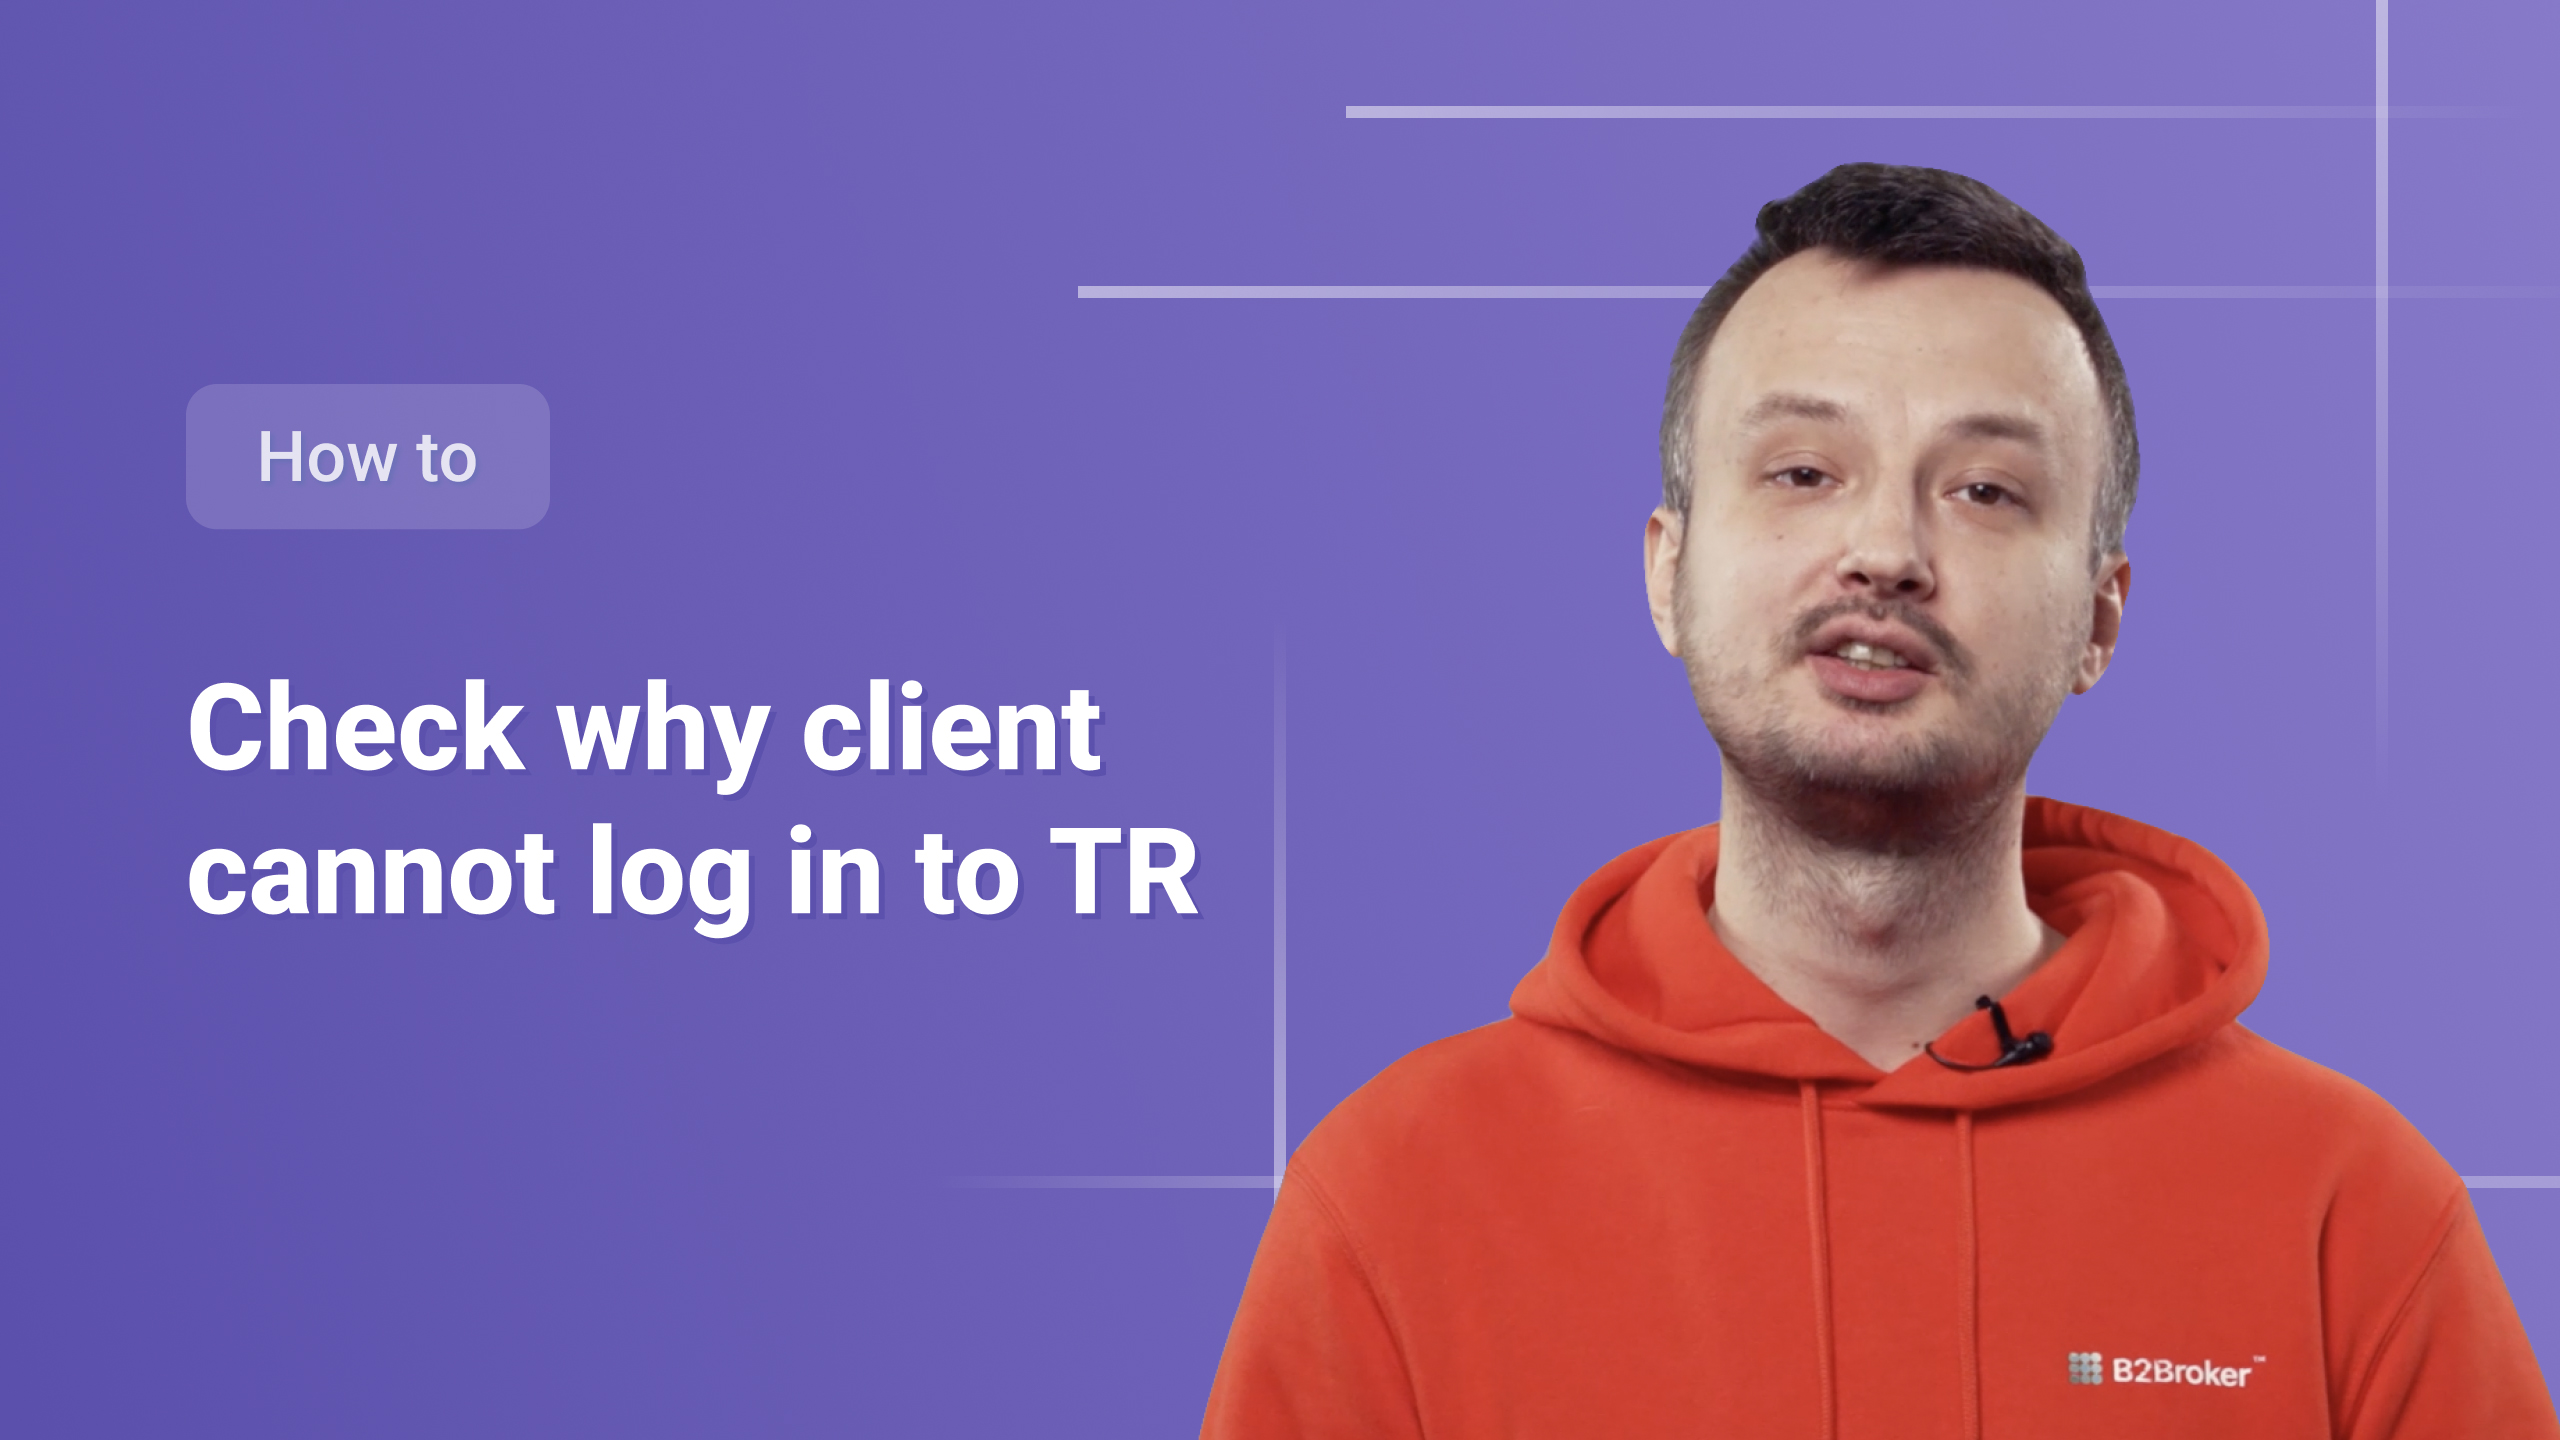 How to check why client cannot log in to TR?